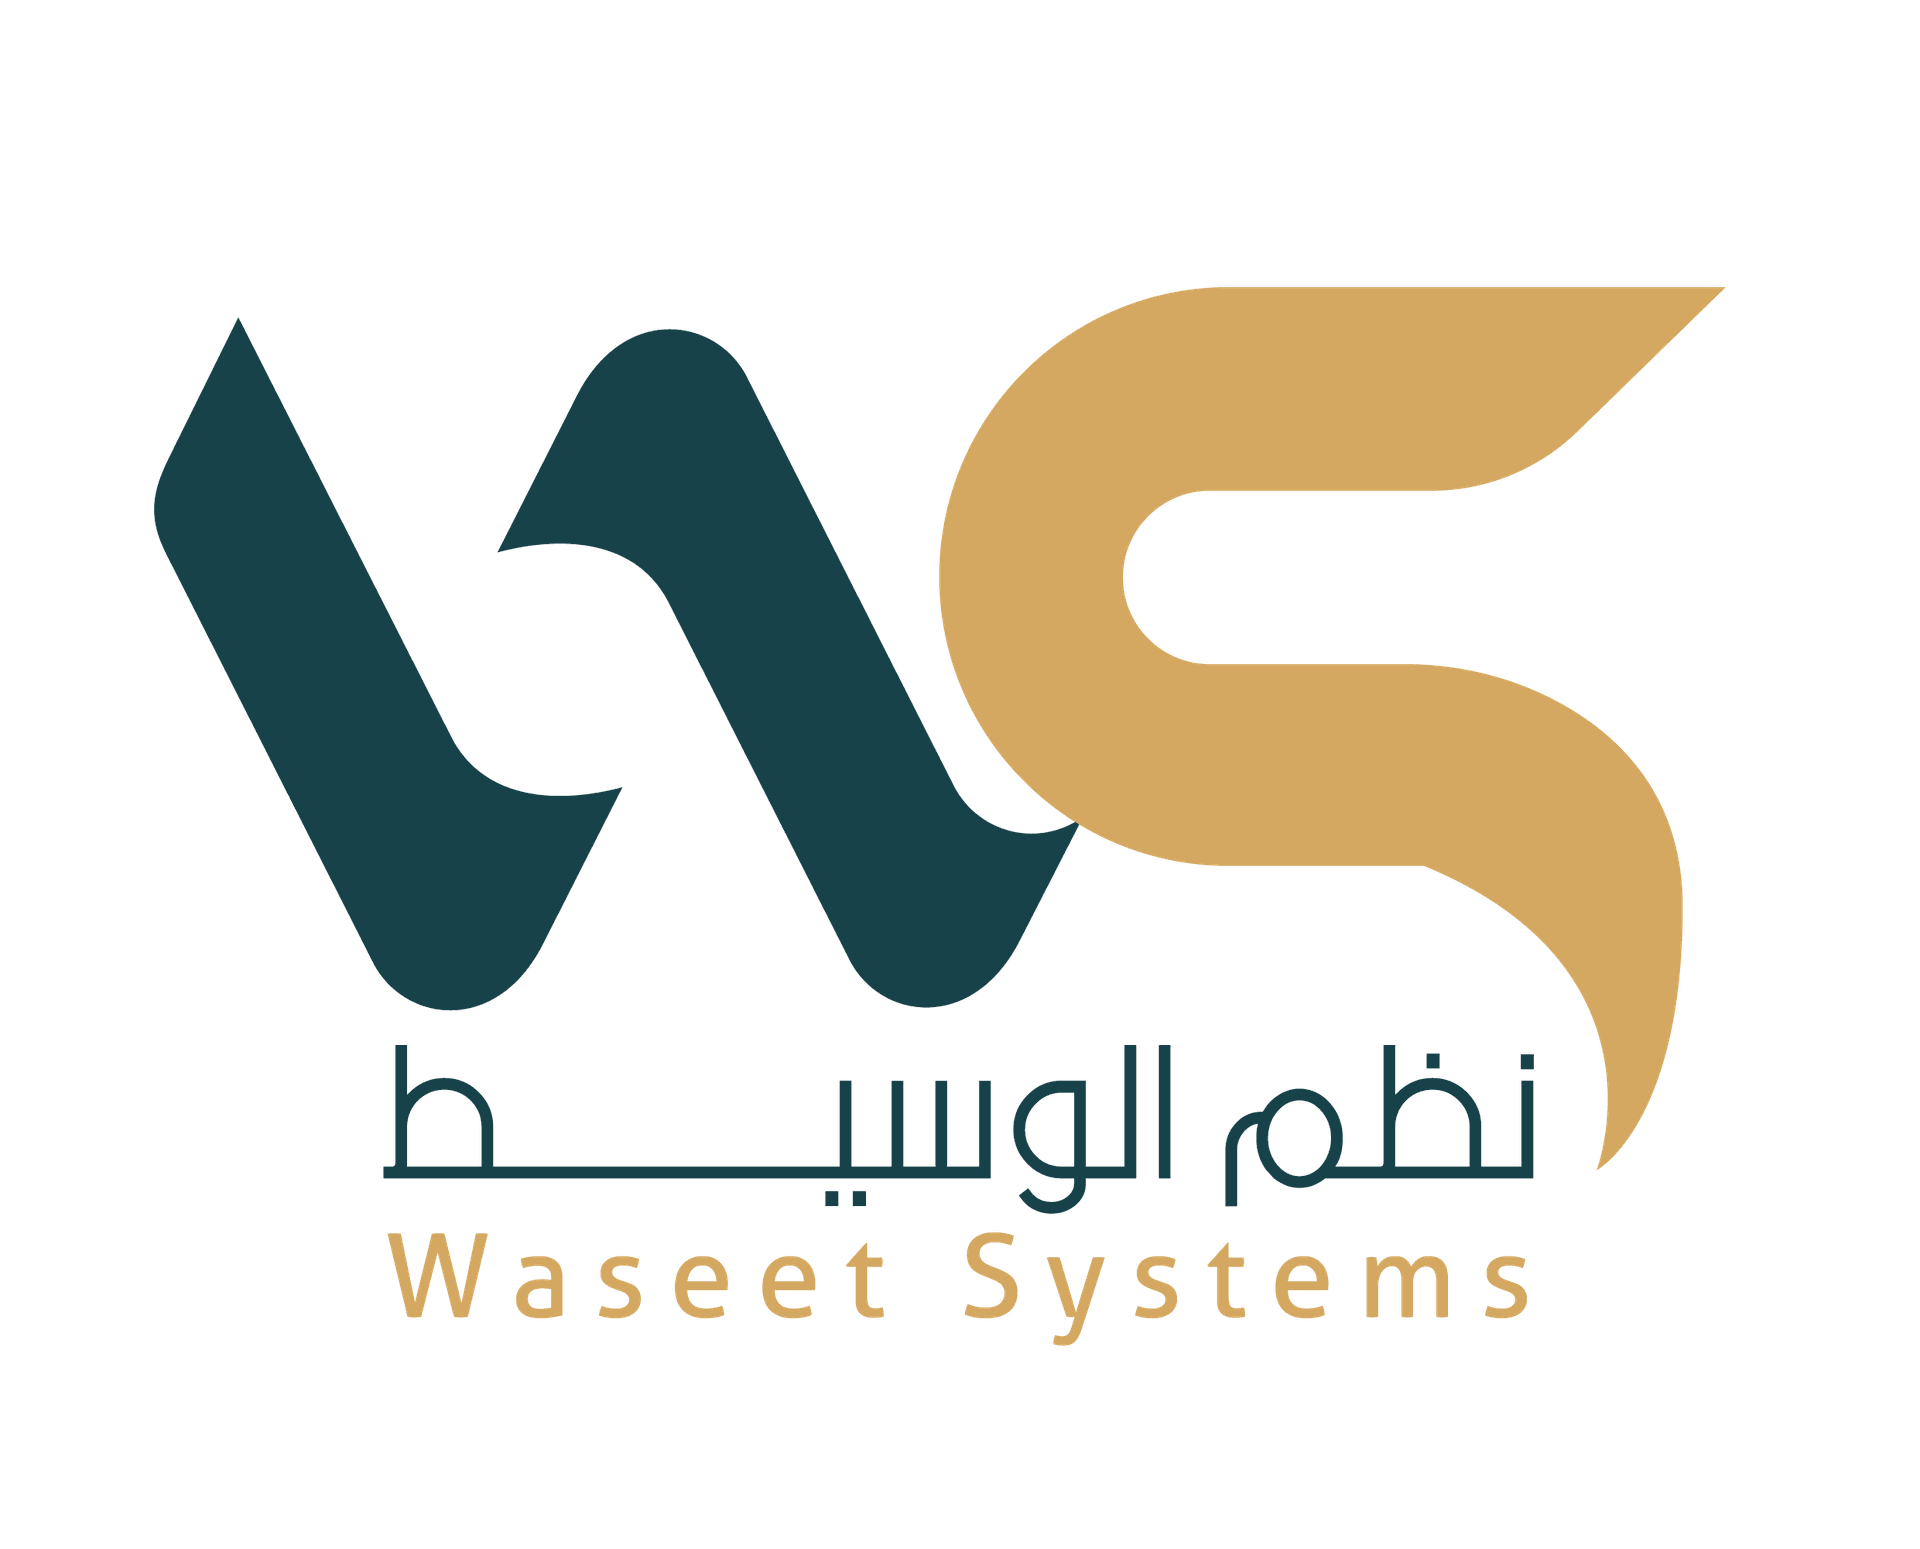 Waseet Systems